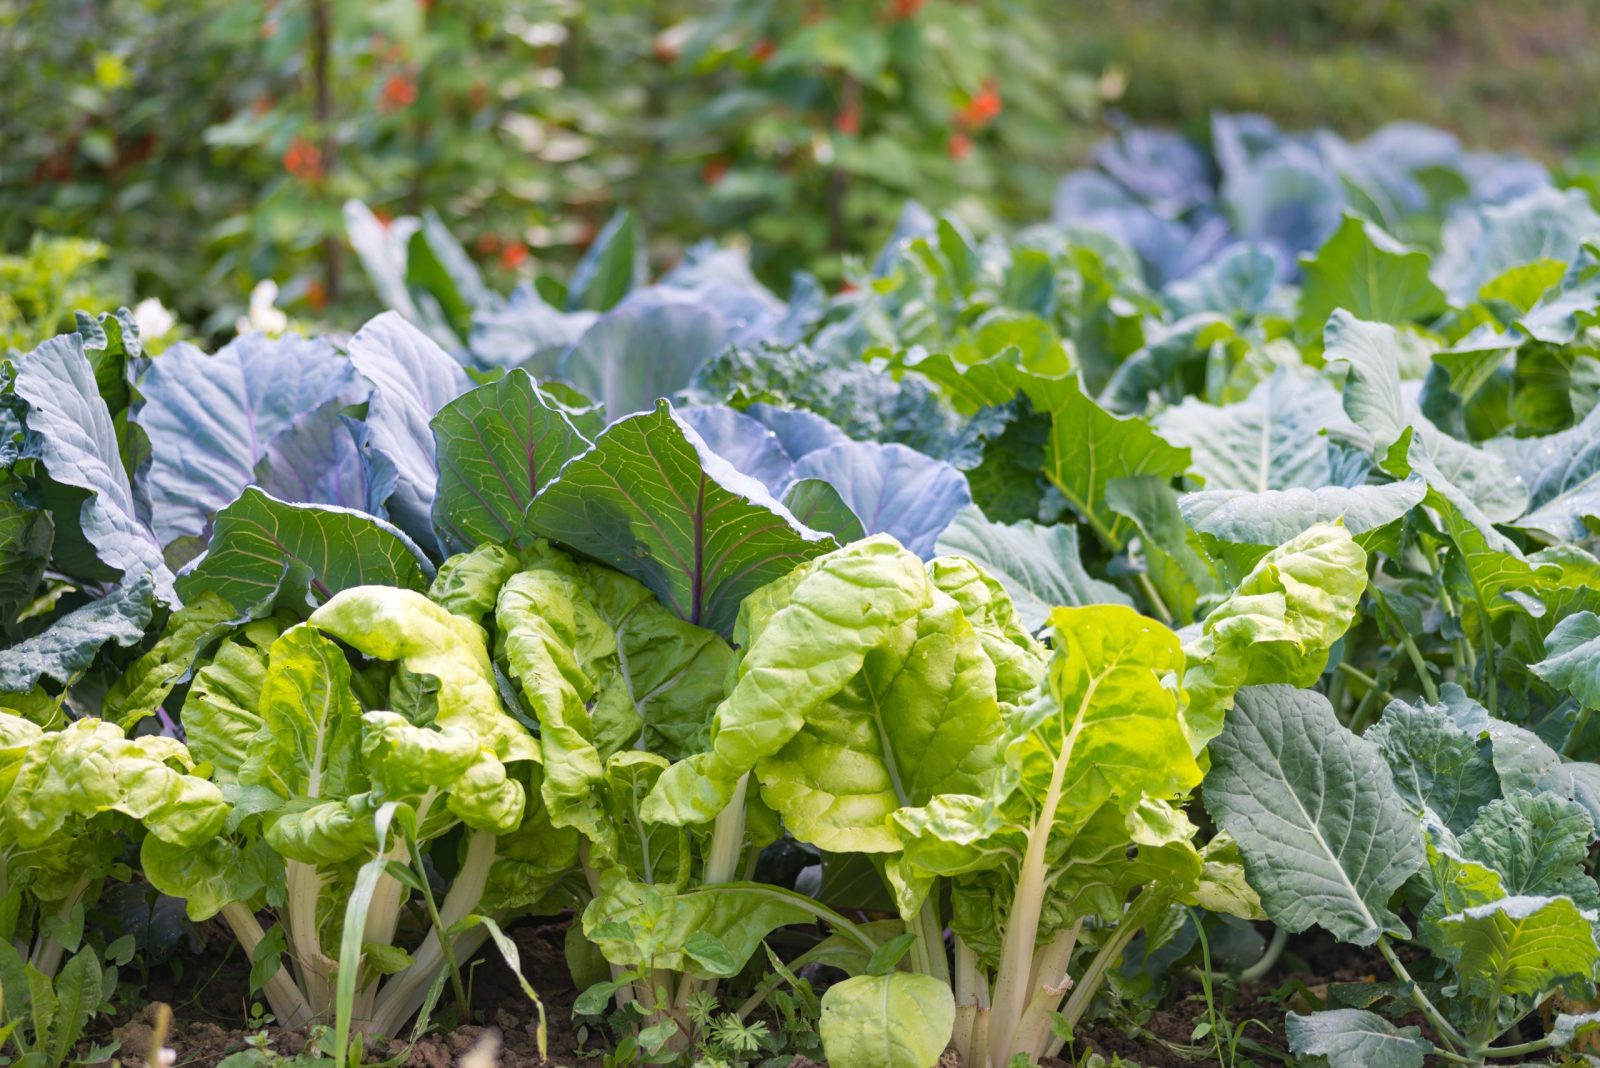 Leaves of various cabbage (Brassicas) plants in homemade garden plot.